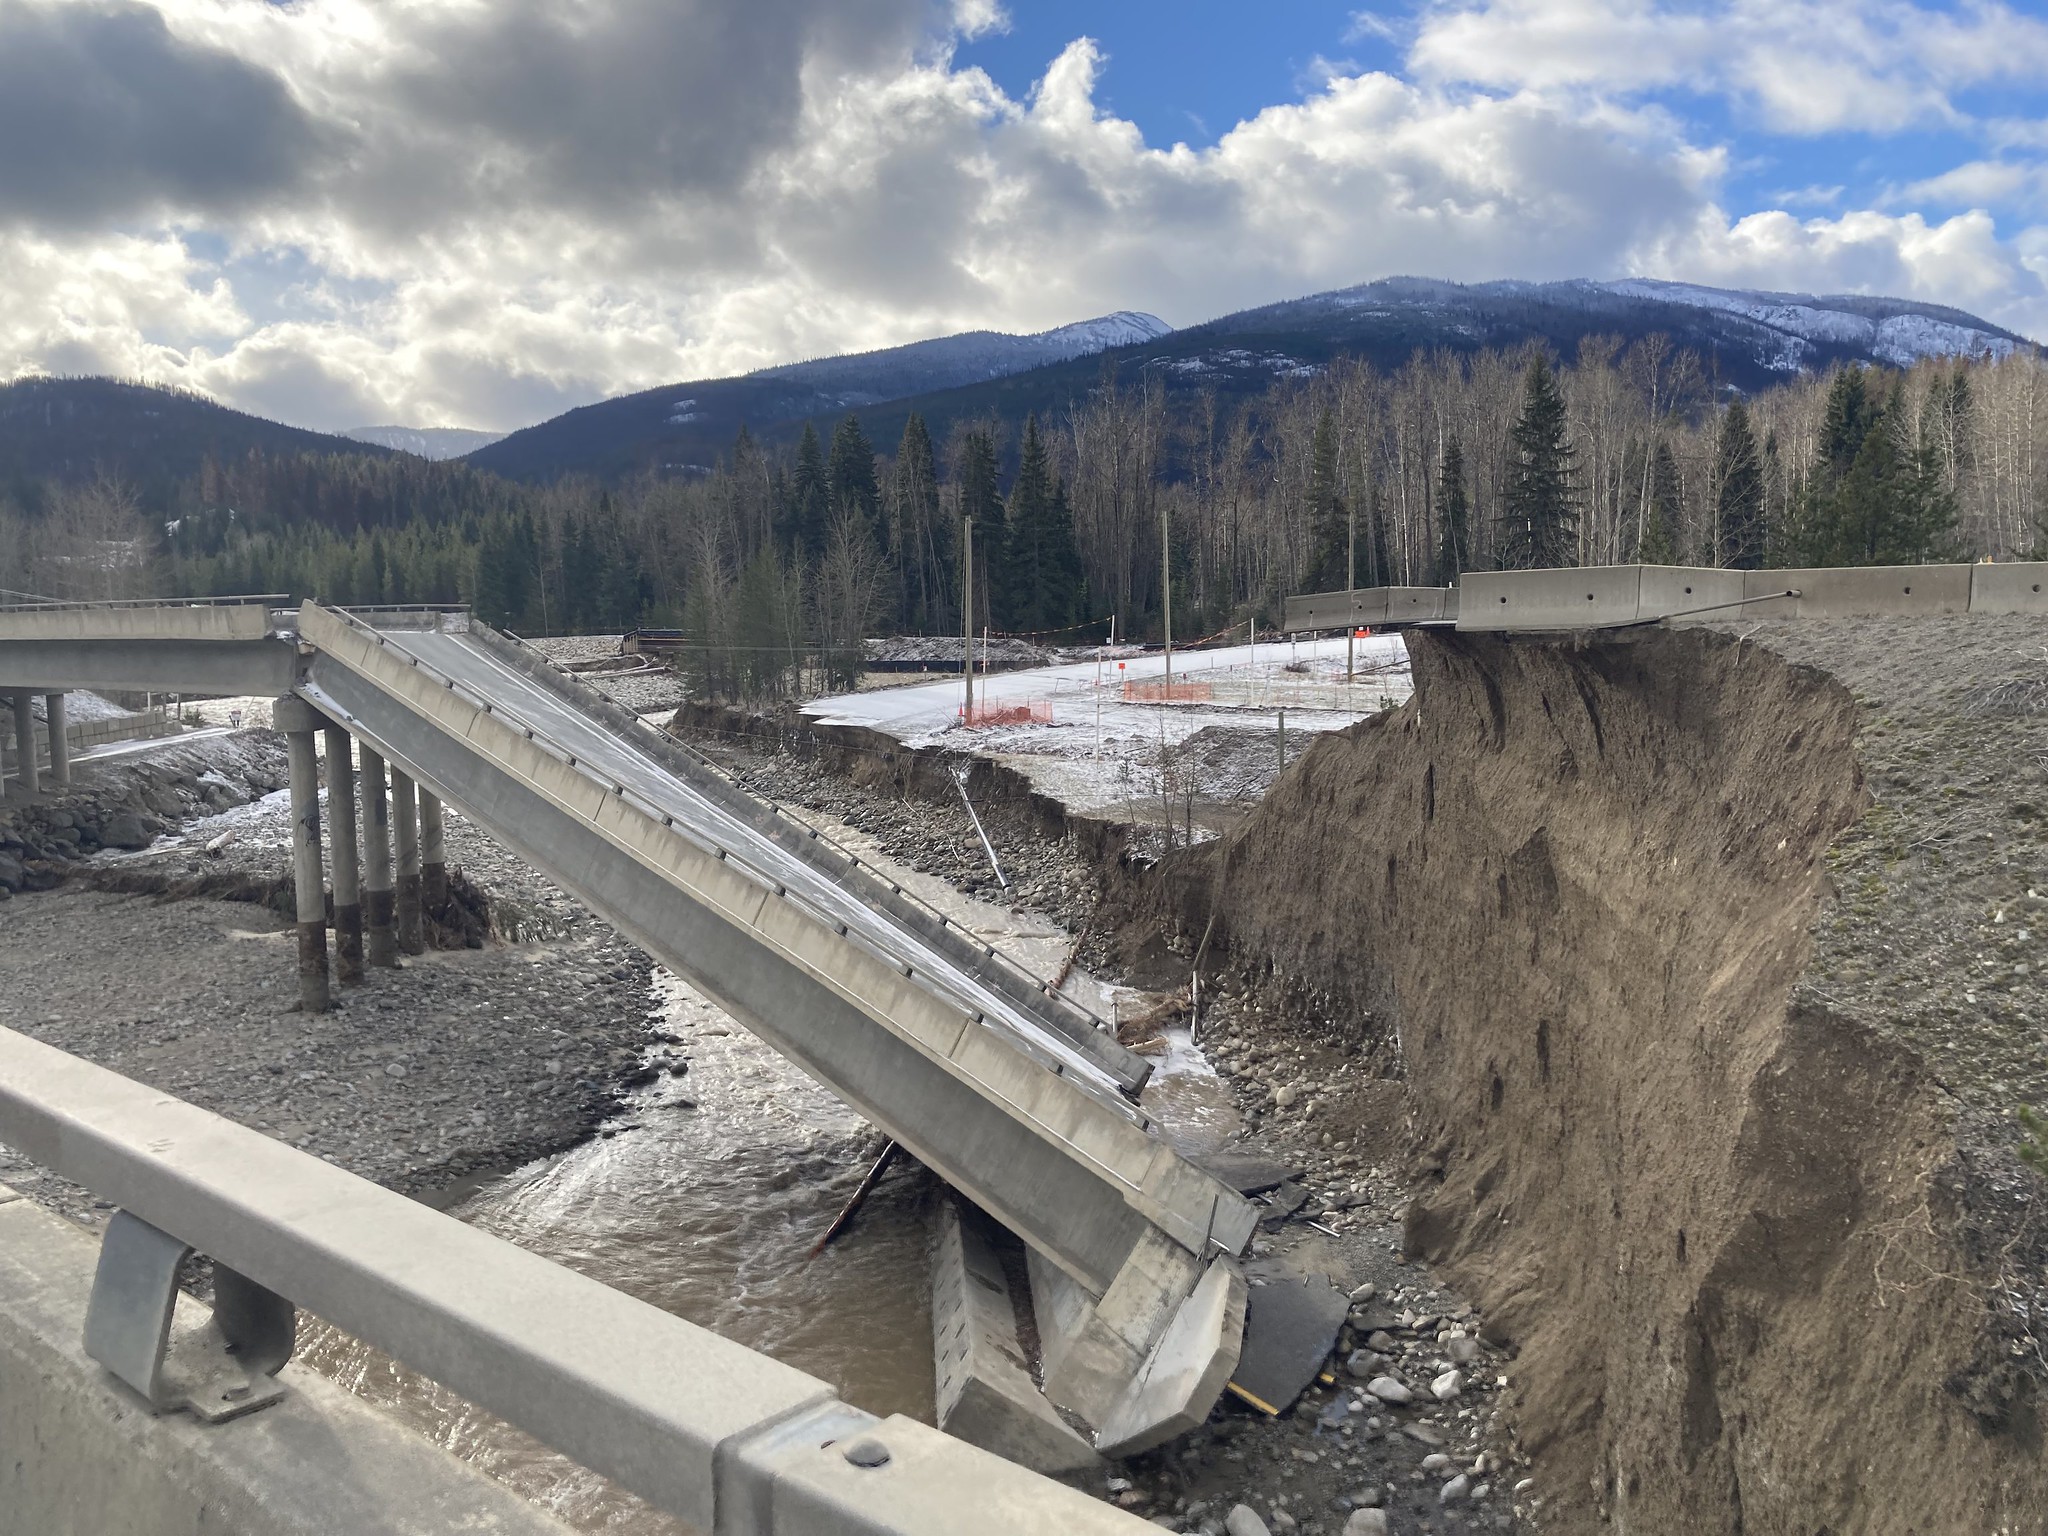 The Coquihalla Highway is pictured from above with extensive damage the the structure due to mudslides